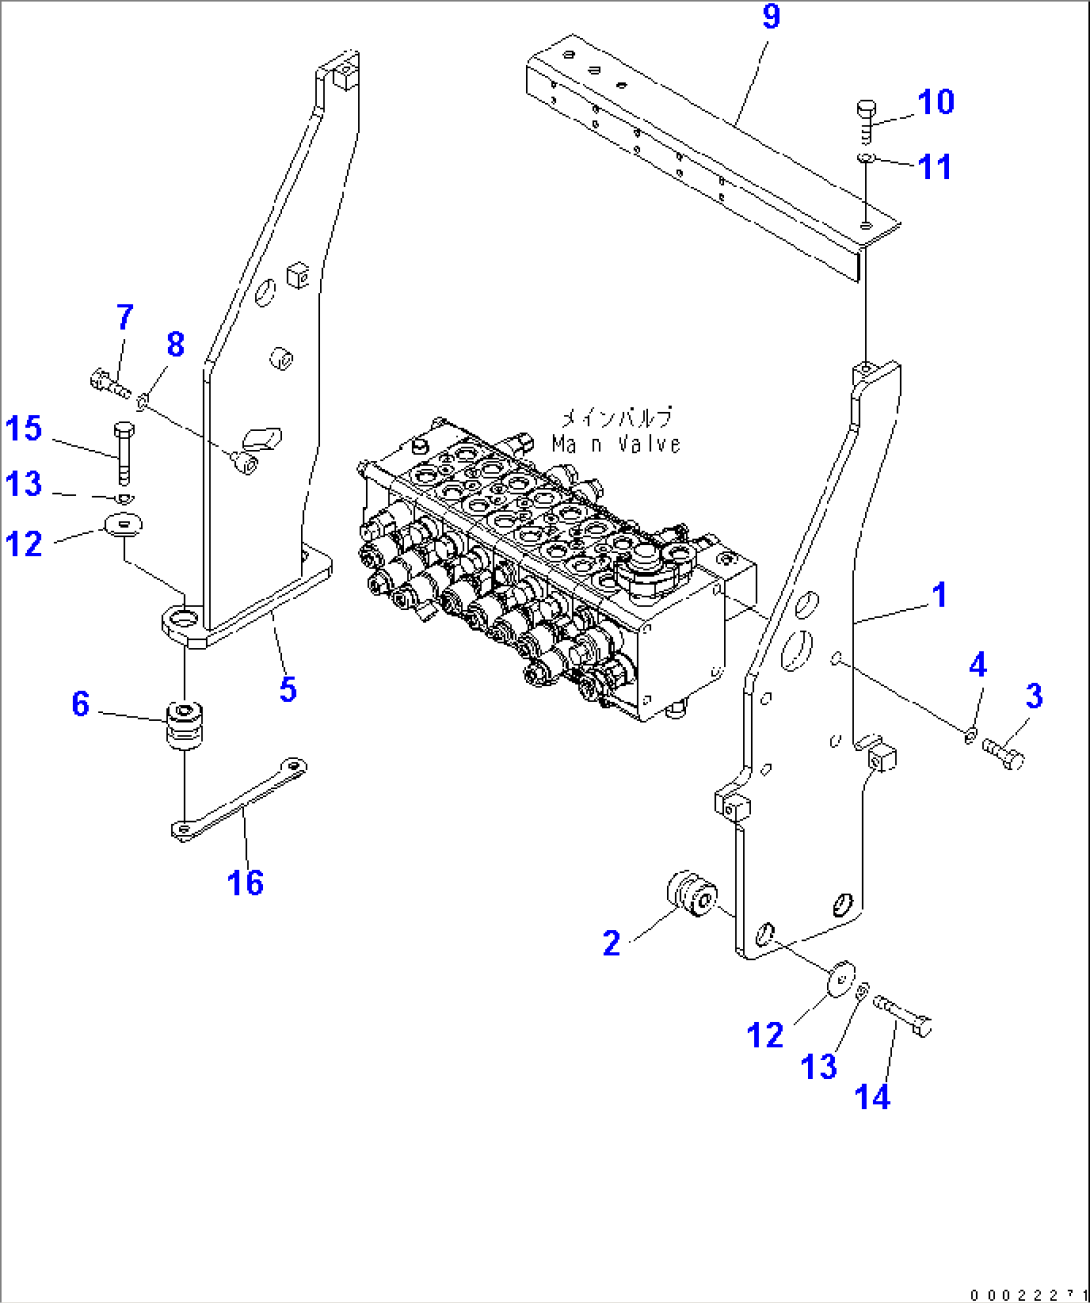 MAIN VALVE AND MOUNTING PARTS (FOR 2-PIECE BOOM) (FOR 1-PIECE BOOM WITH 2 ATT.)